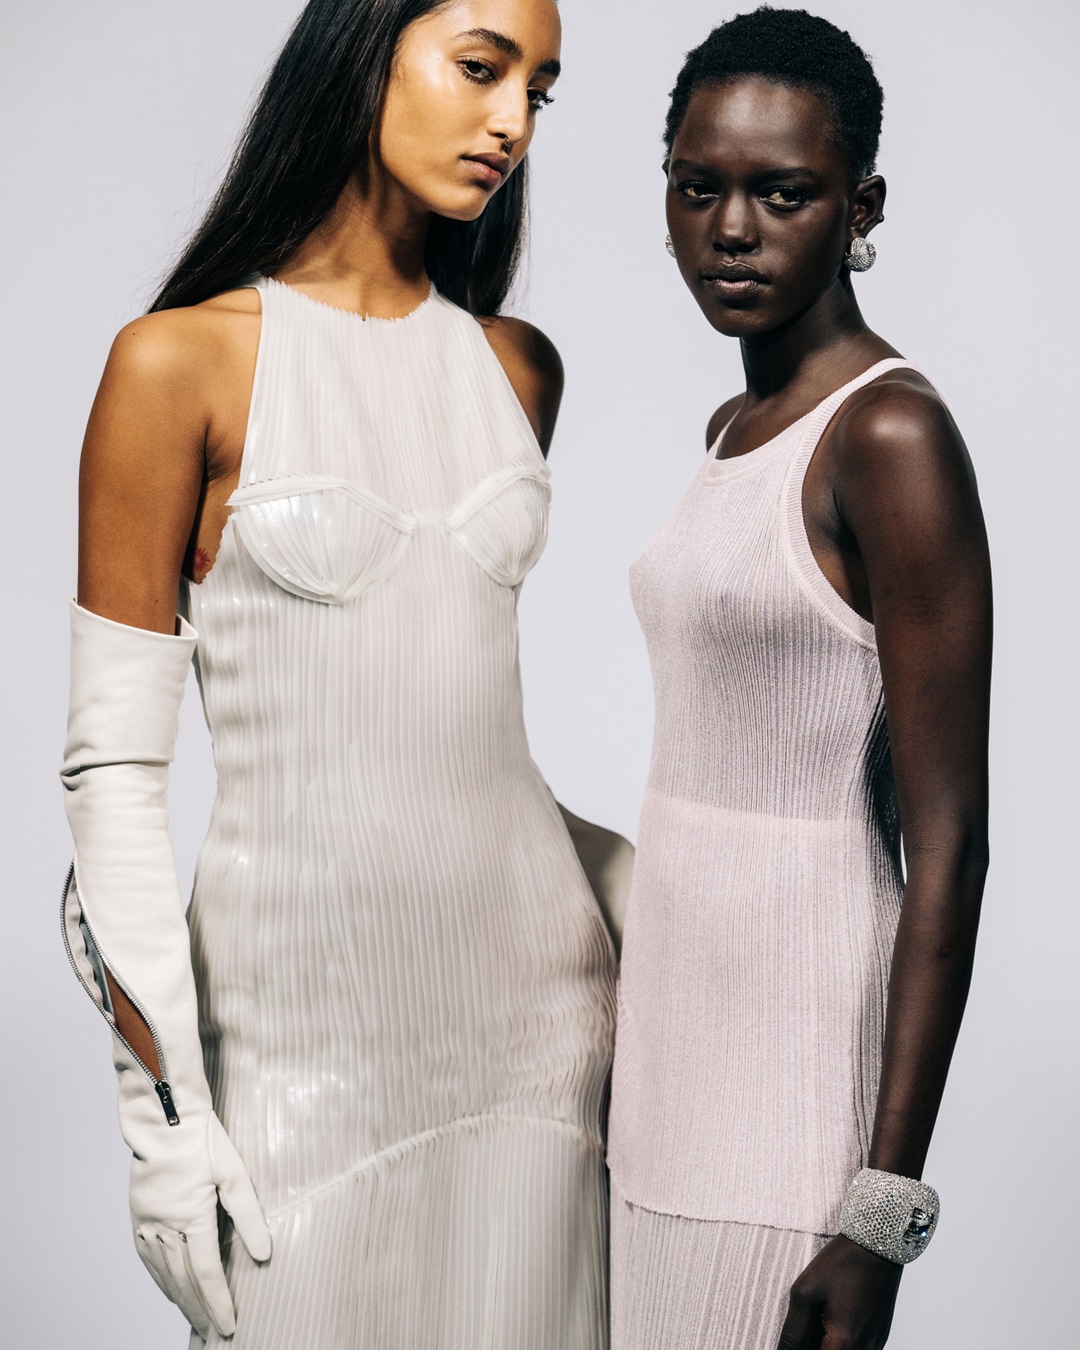 GIVENCHY PRESENTS SS23 WOMEN´S READY-TO-WEAR COLLECTION - Numéro Netherlands